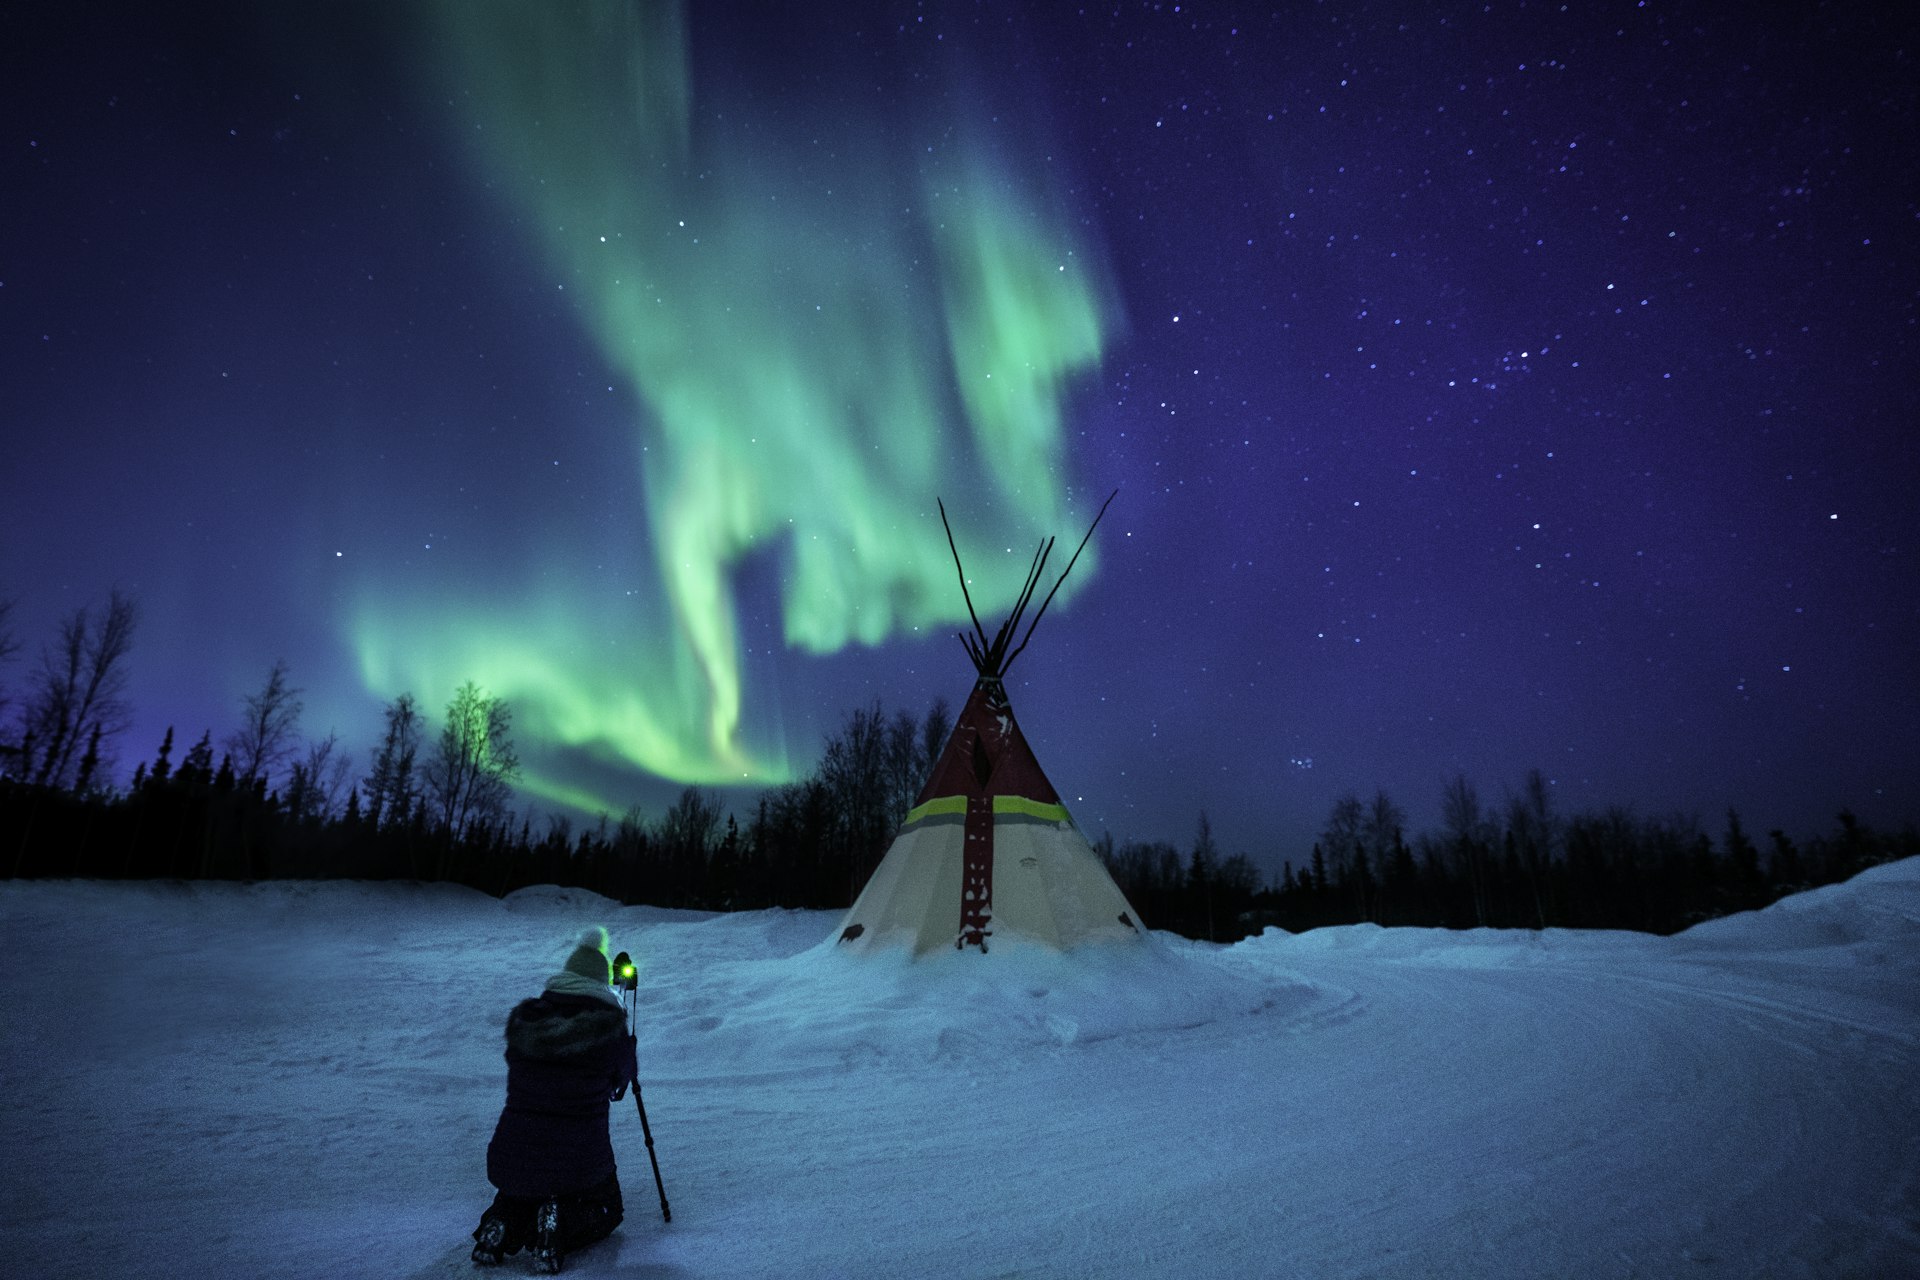 GettyA photographer in winter clothing takes a photo of a brightly lit traditional teepee under the green glow of the Northern Lights in a snowy landscape